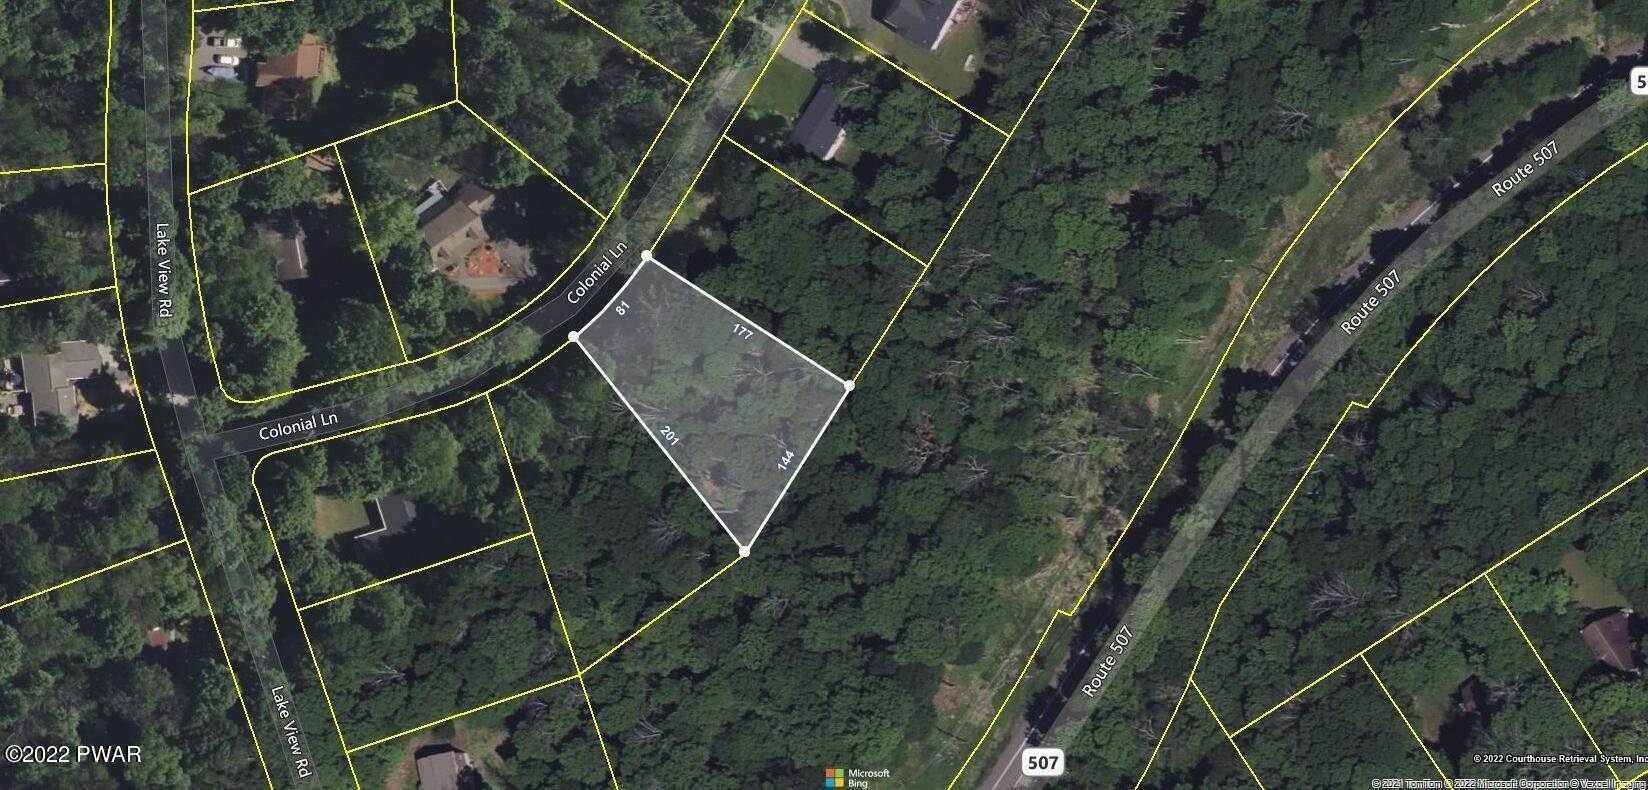 3. Land for Sale at 105 Colonial Ln Greentown, Pennsylvania 18426 United States